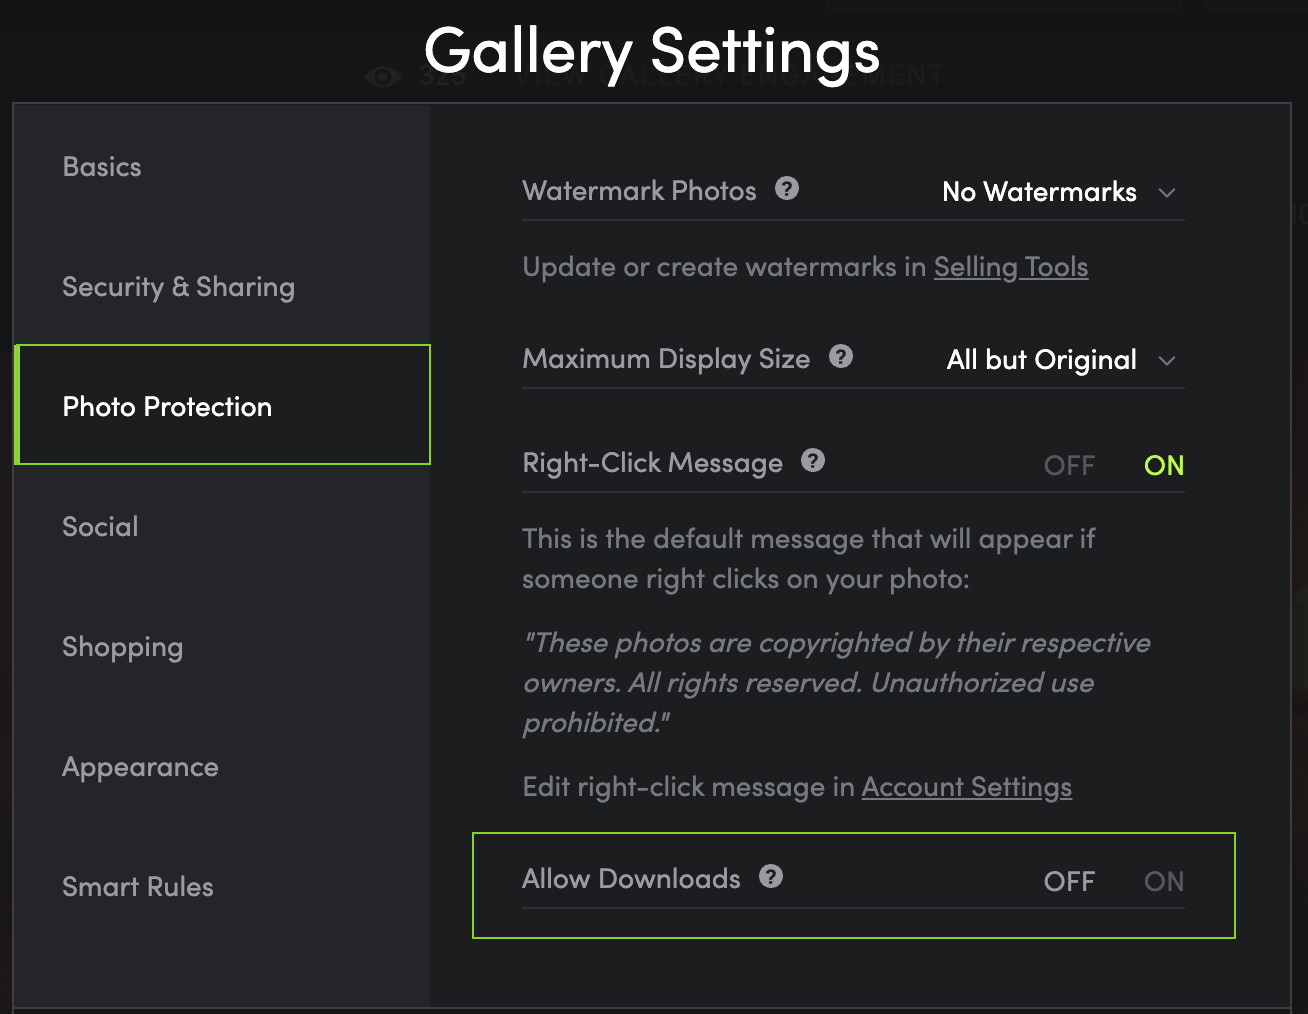 Gallery Settings Download OFF 2023-04-14 at 7.09.57 AM copy.jpg